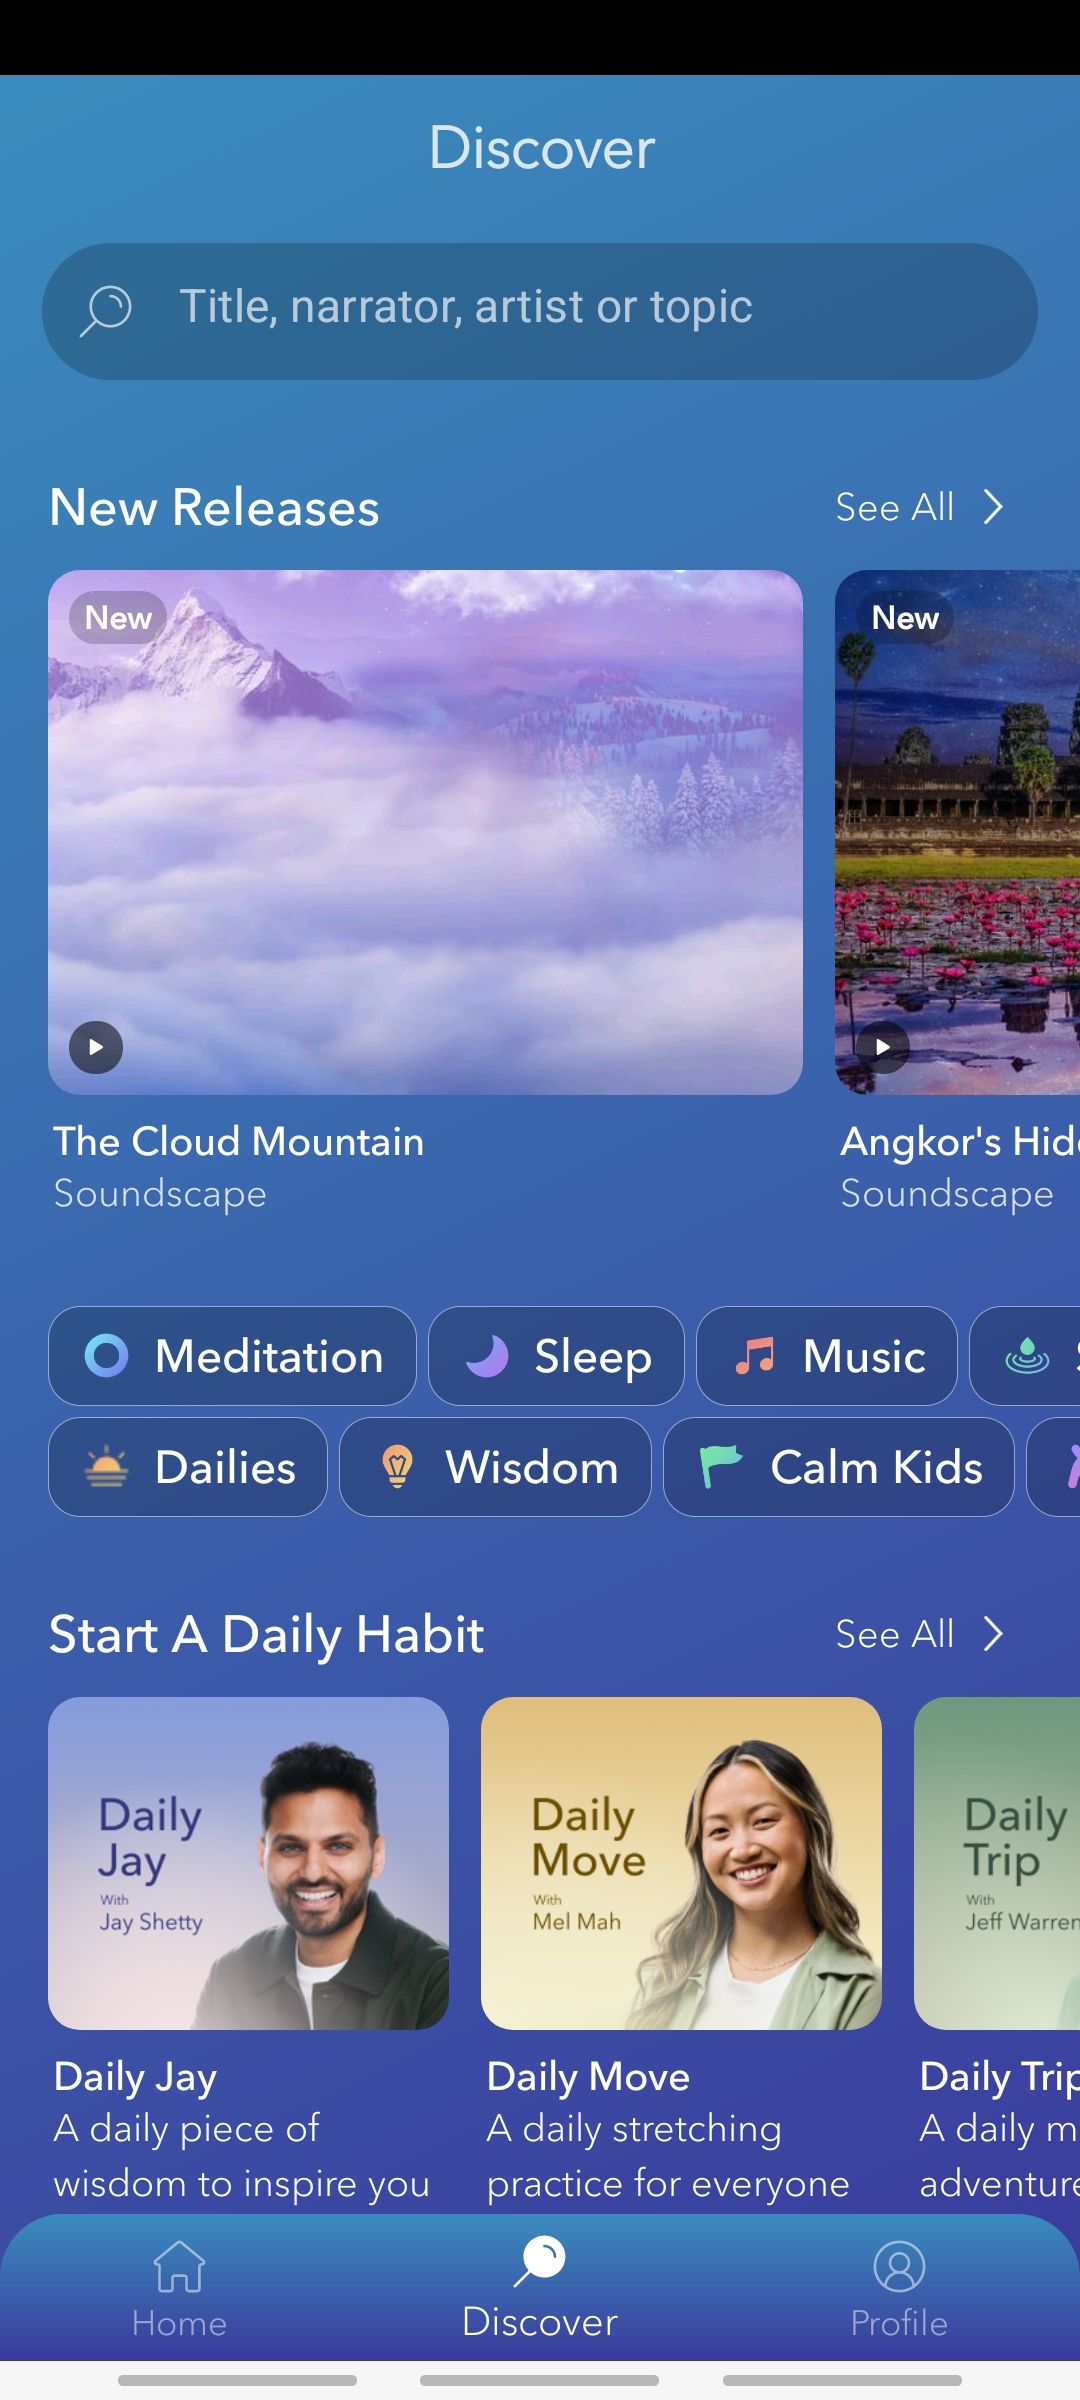 the discover tab on the calm app showing different podcasts and soundscapes